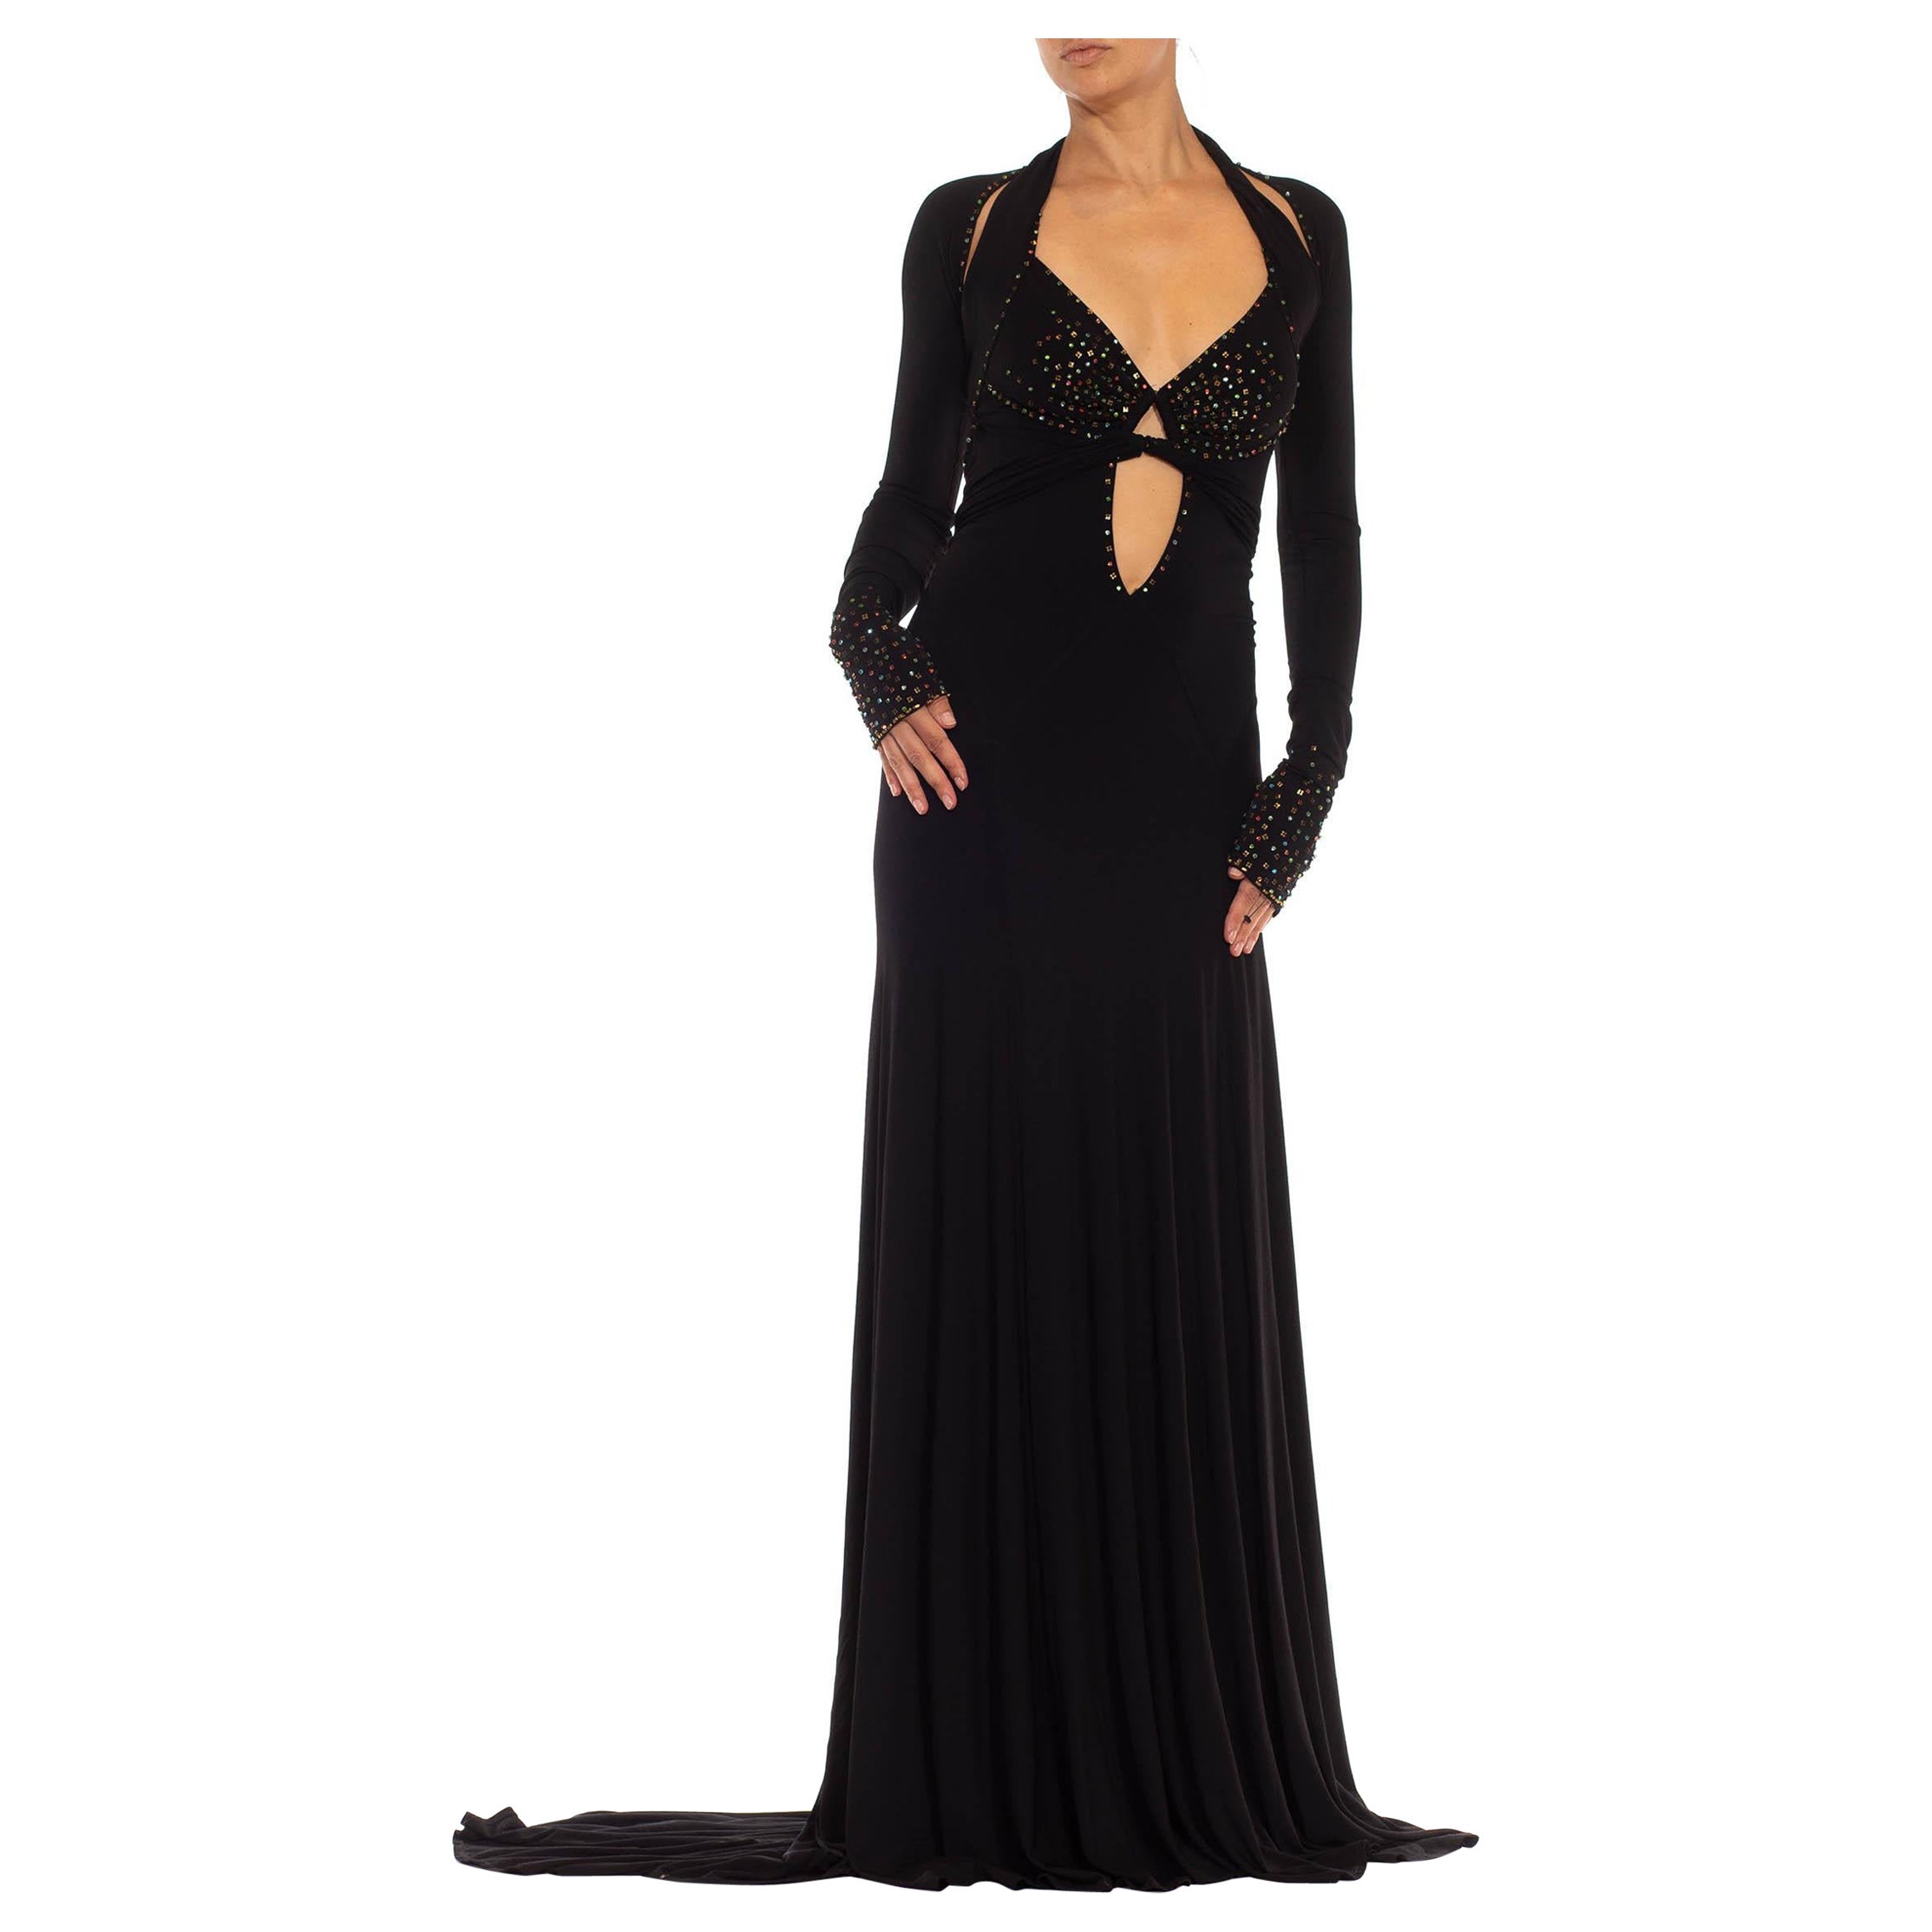 1990S Black Jersey Sexy Slinky Rhinestone Halter Neck Gown With Arm Sleeve Piece For Sale